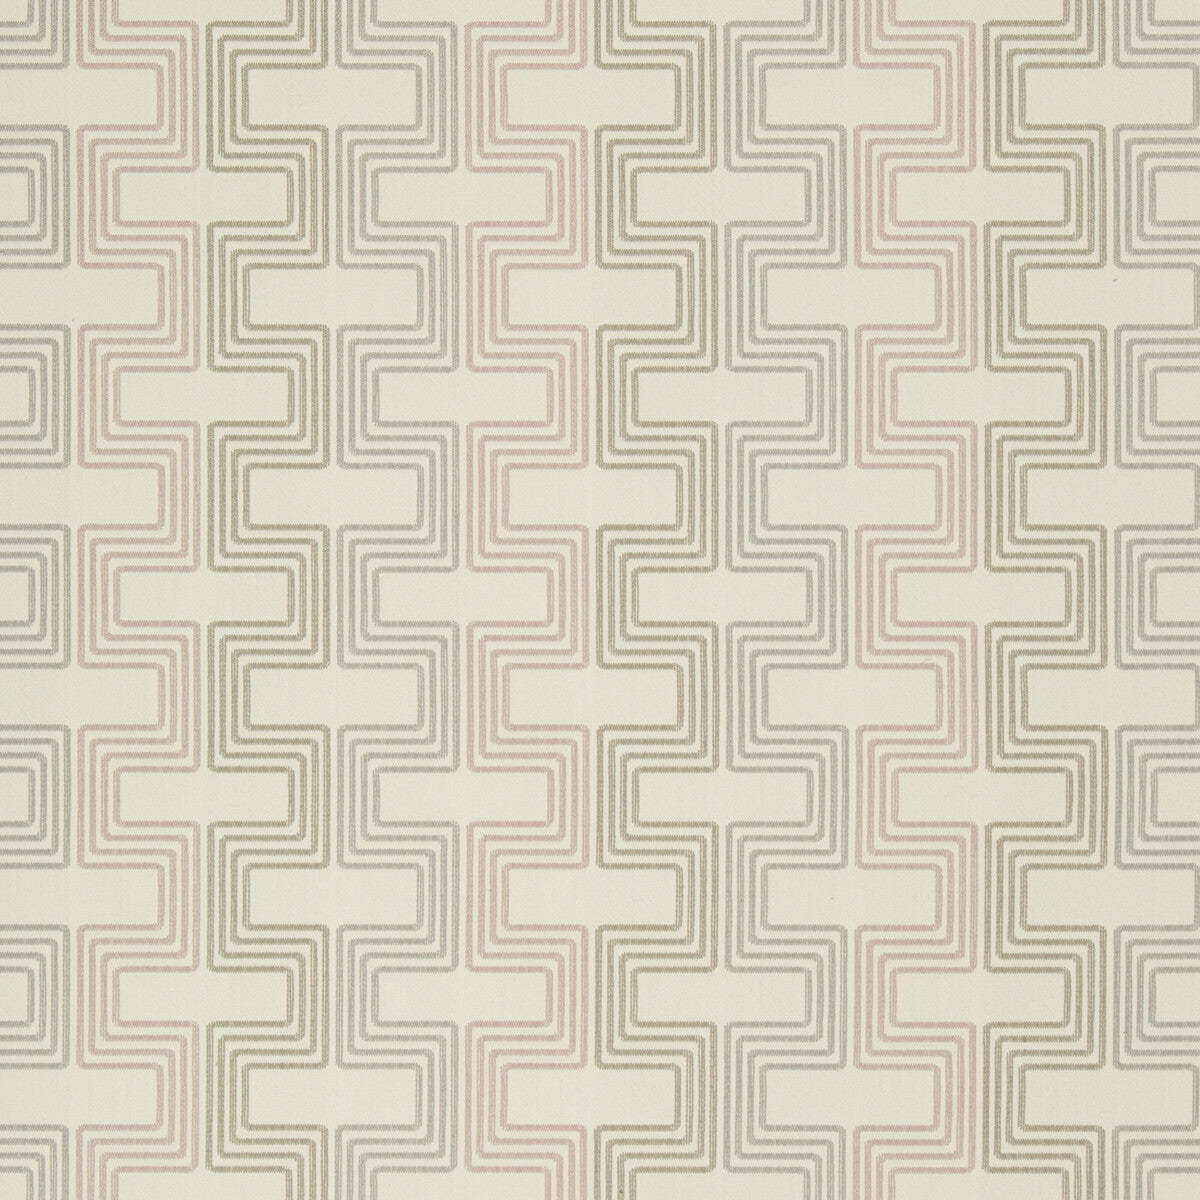 Enroute fabric in quartz color - pattern 35095.10.0 - by Kravet Contract in the Gis Crypton collection